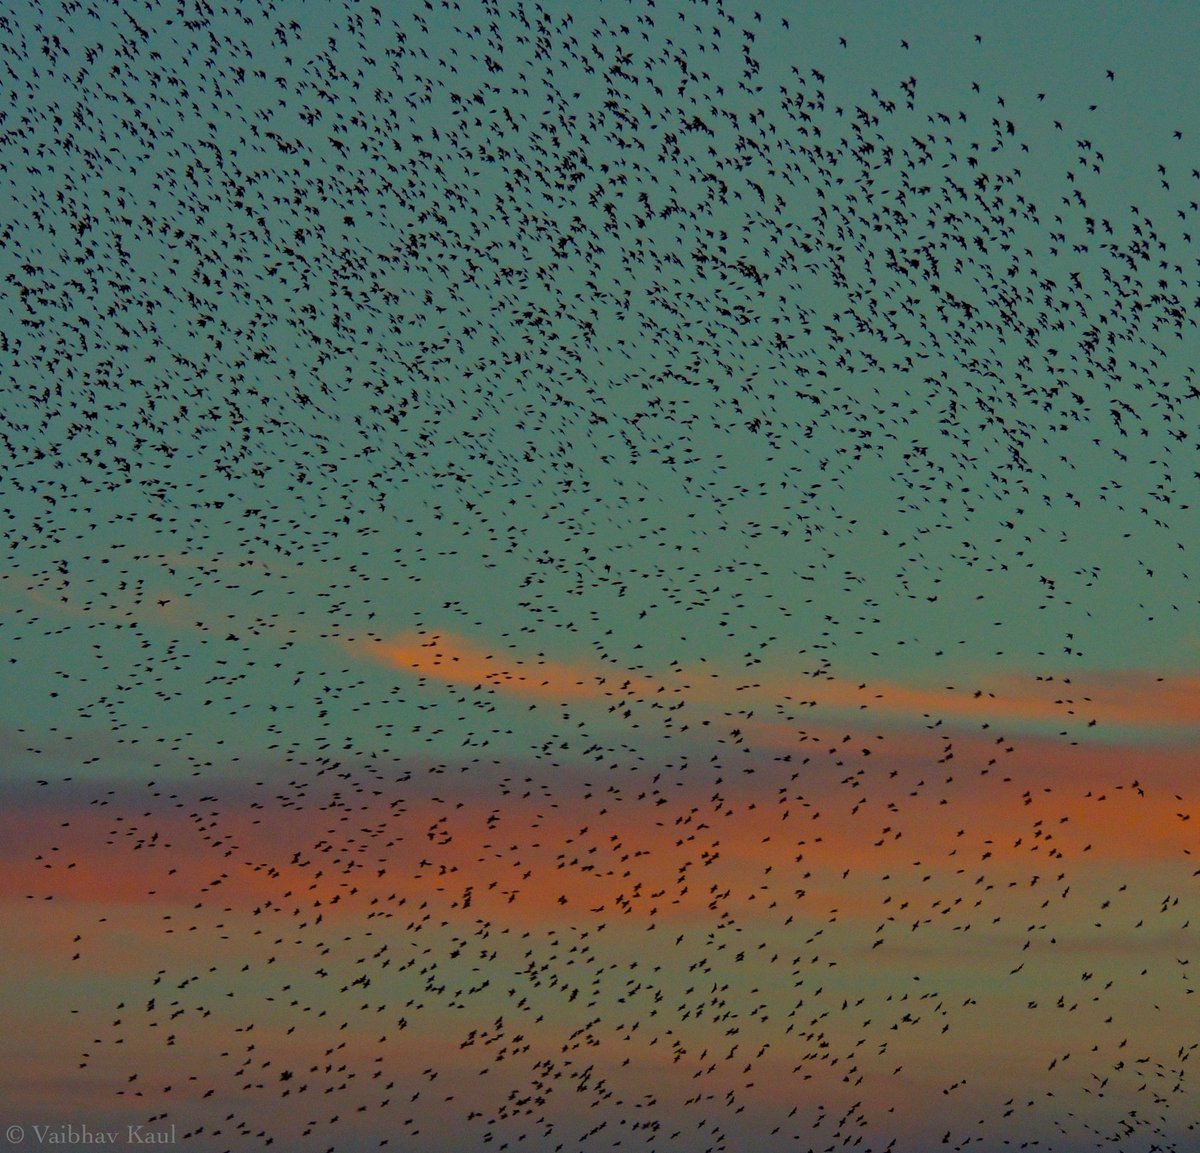 Countless starlings of peace for those who are in pain